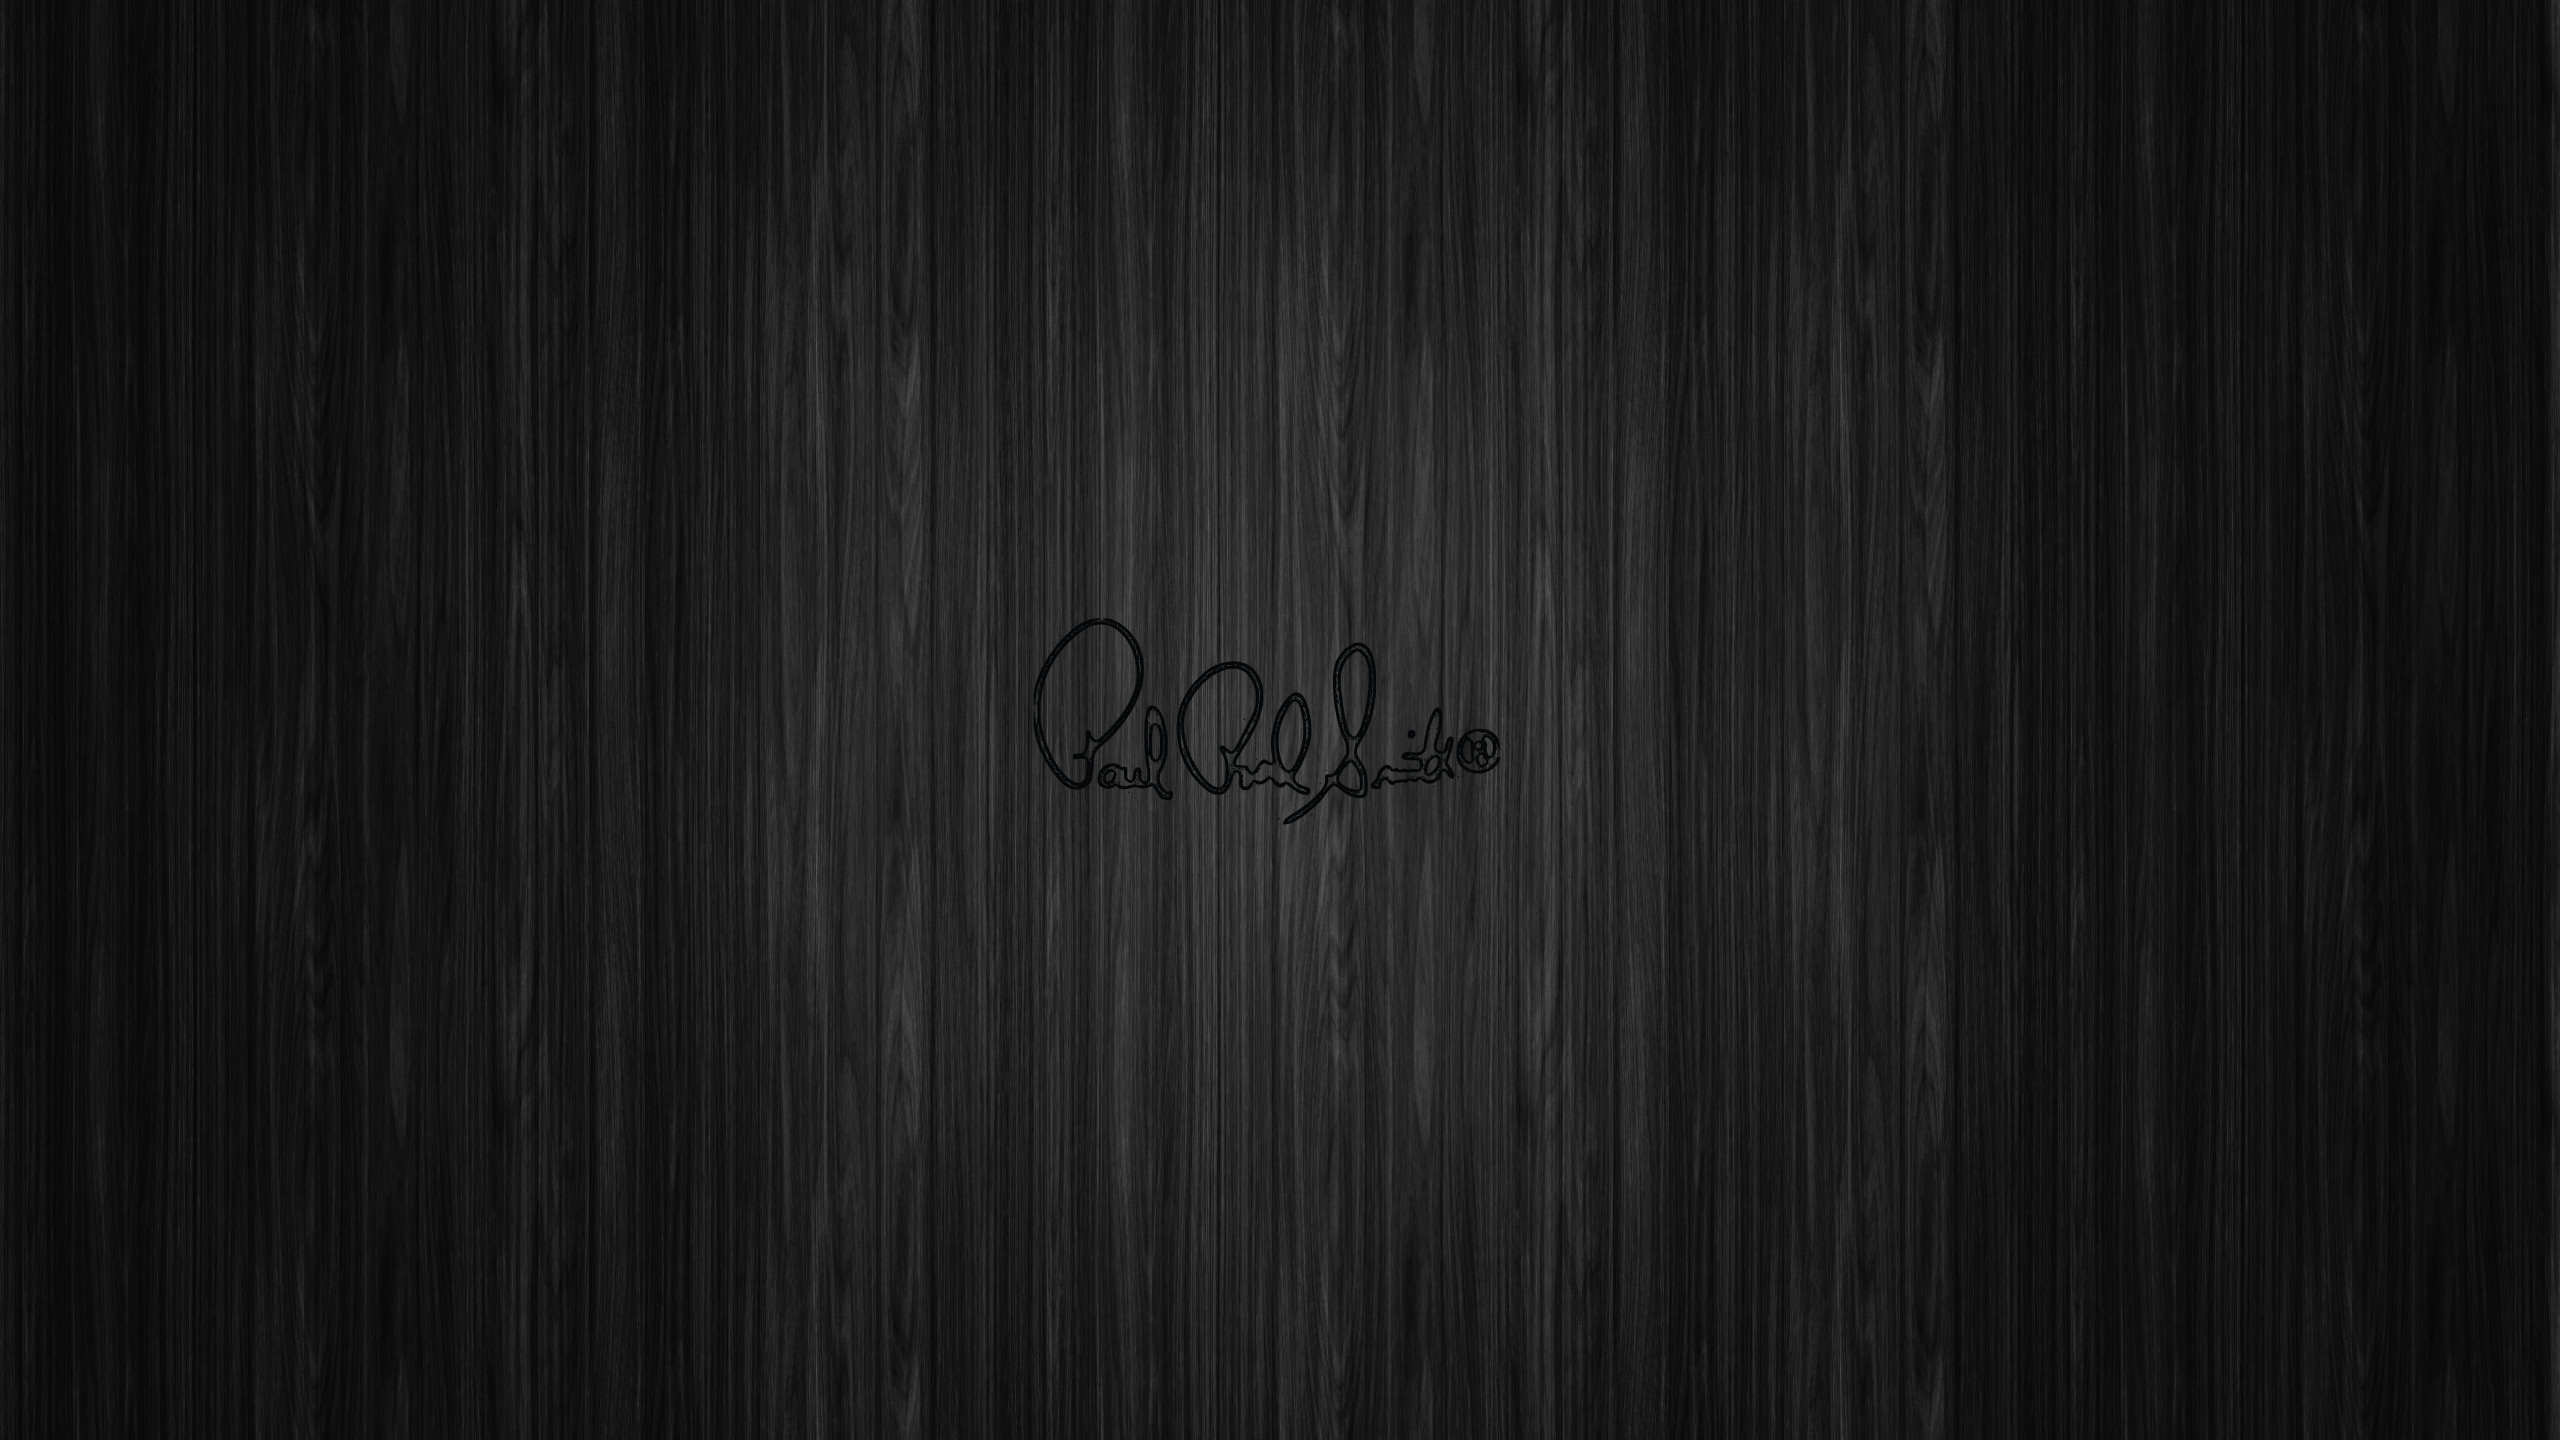 2560x1440 cool idea mate, here's one I did with a wood image and fiddling with the PRS  logo in illustrator (vectorising it).